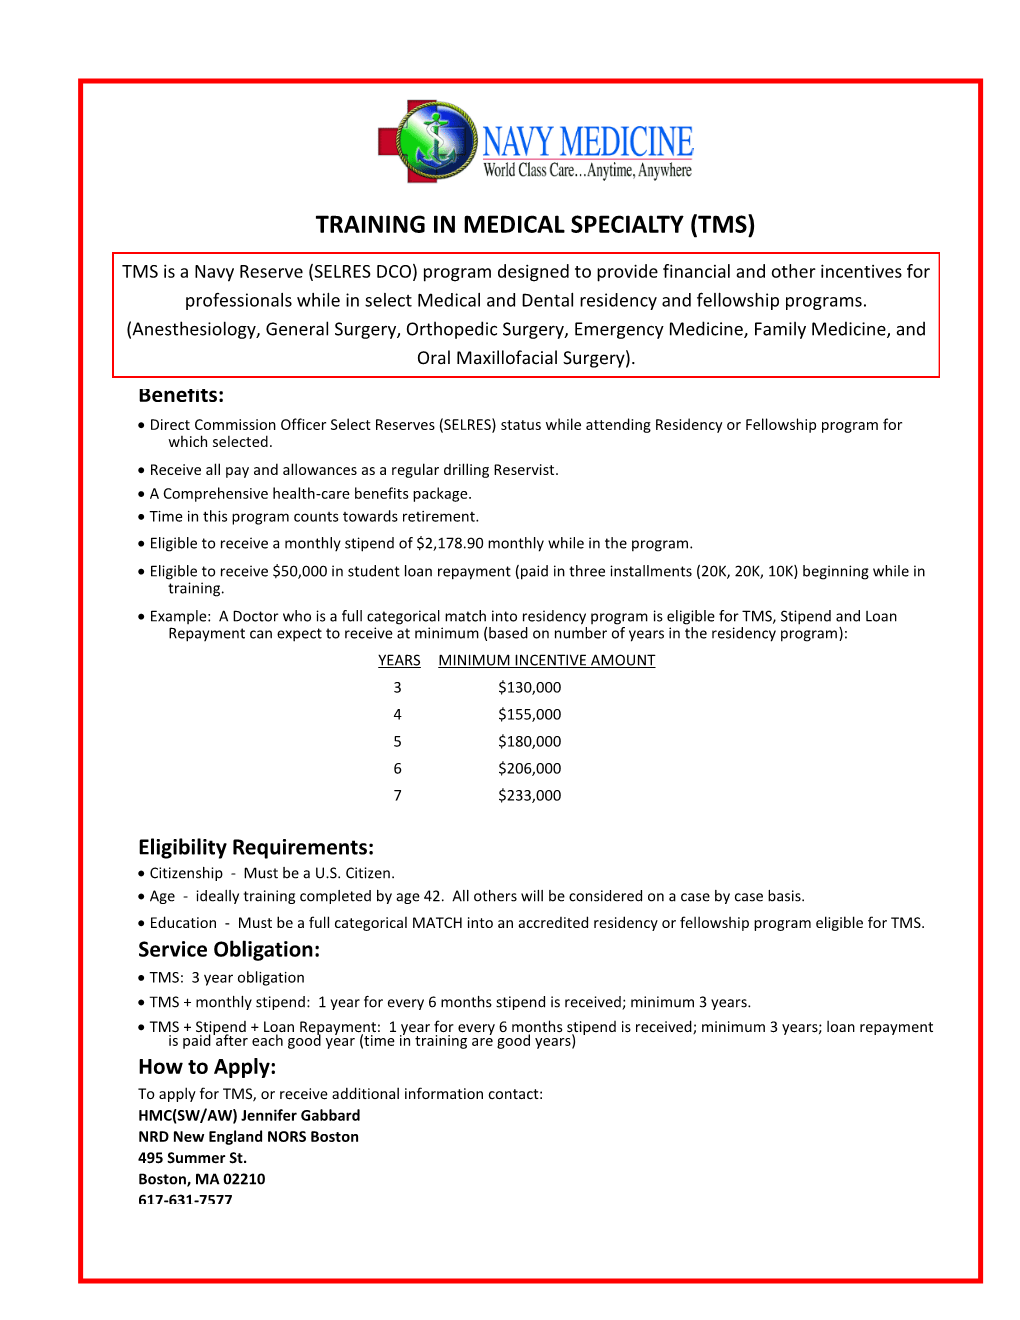 Training in Medical Specialty (Tms)